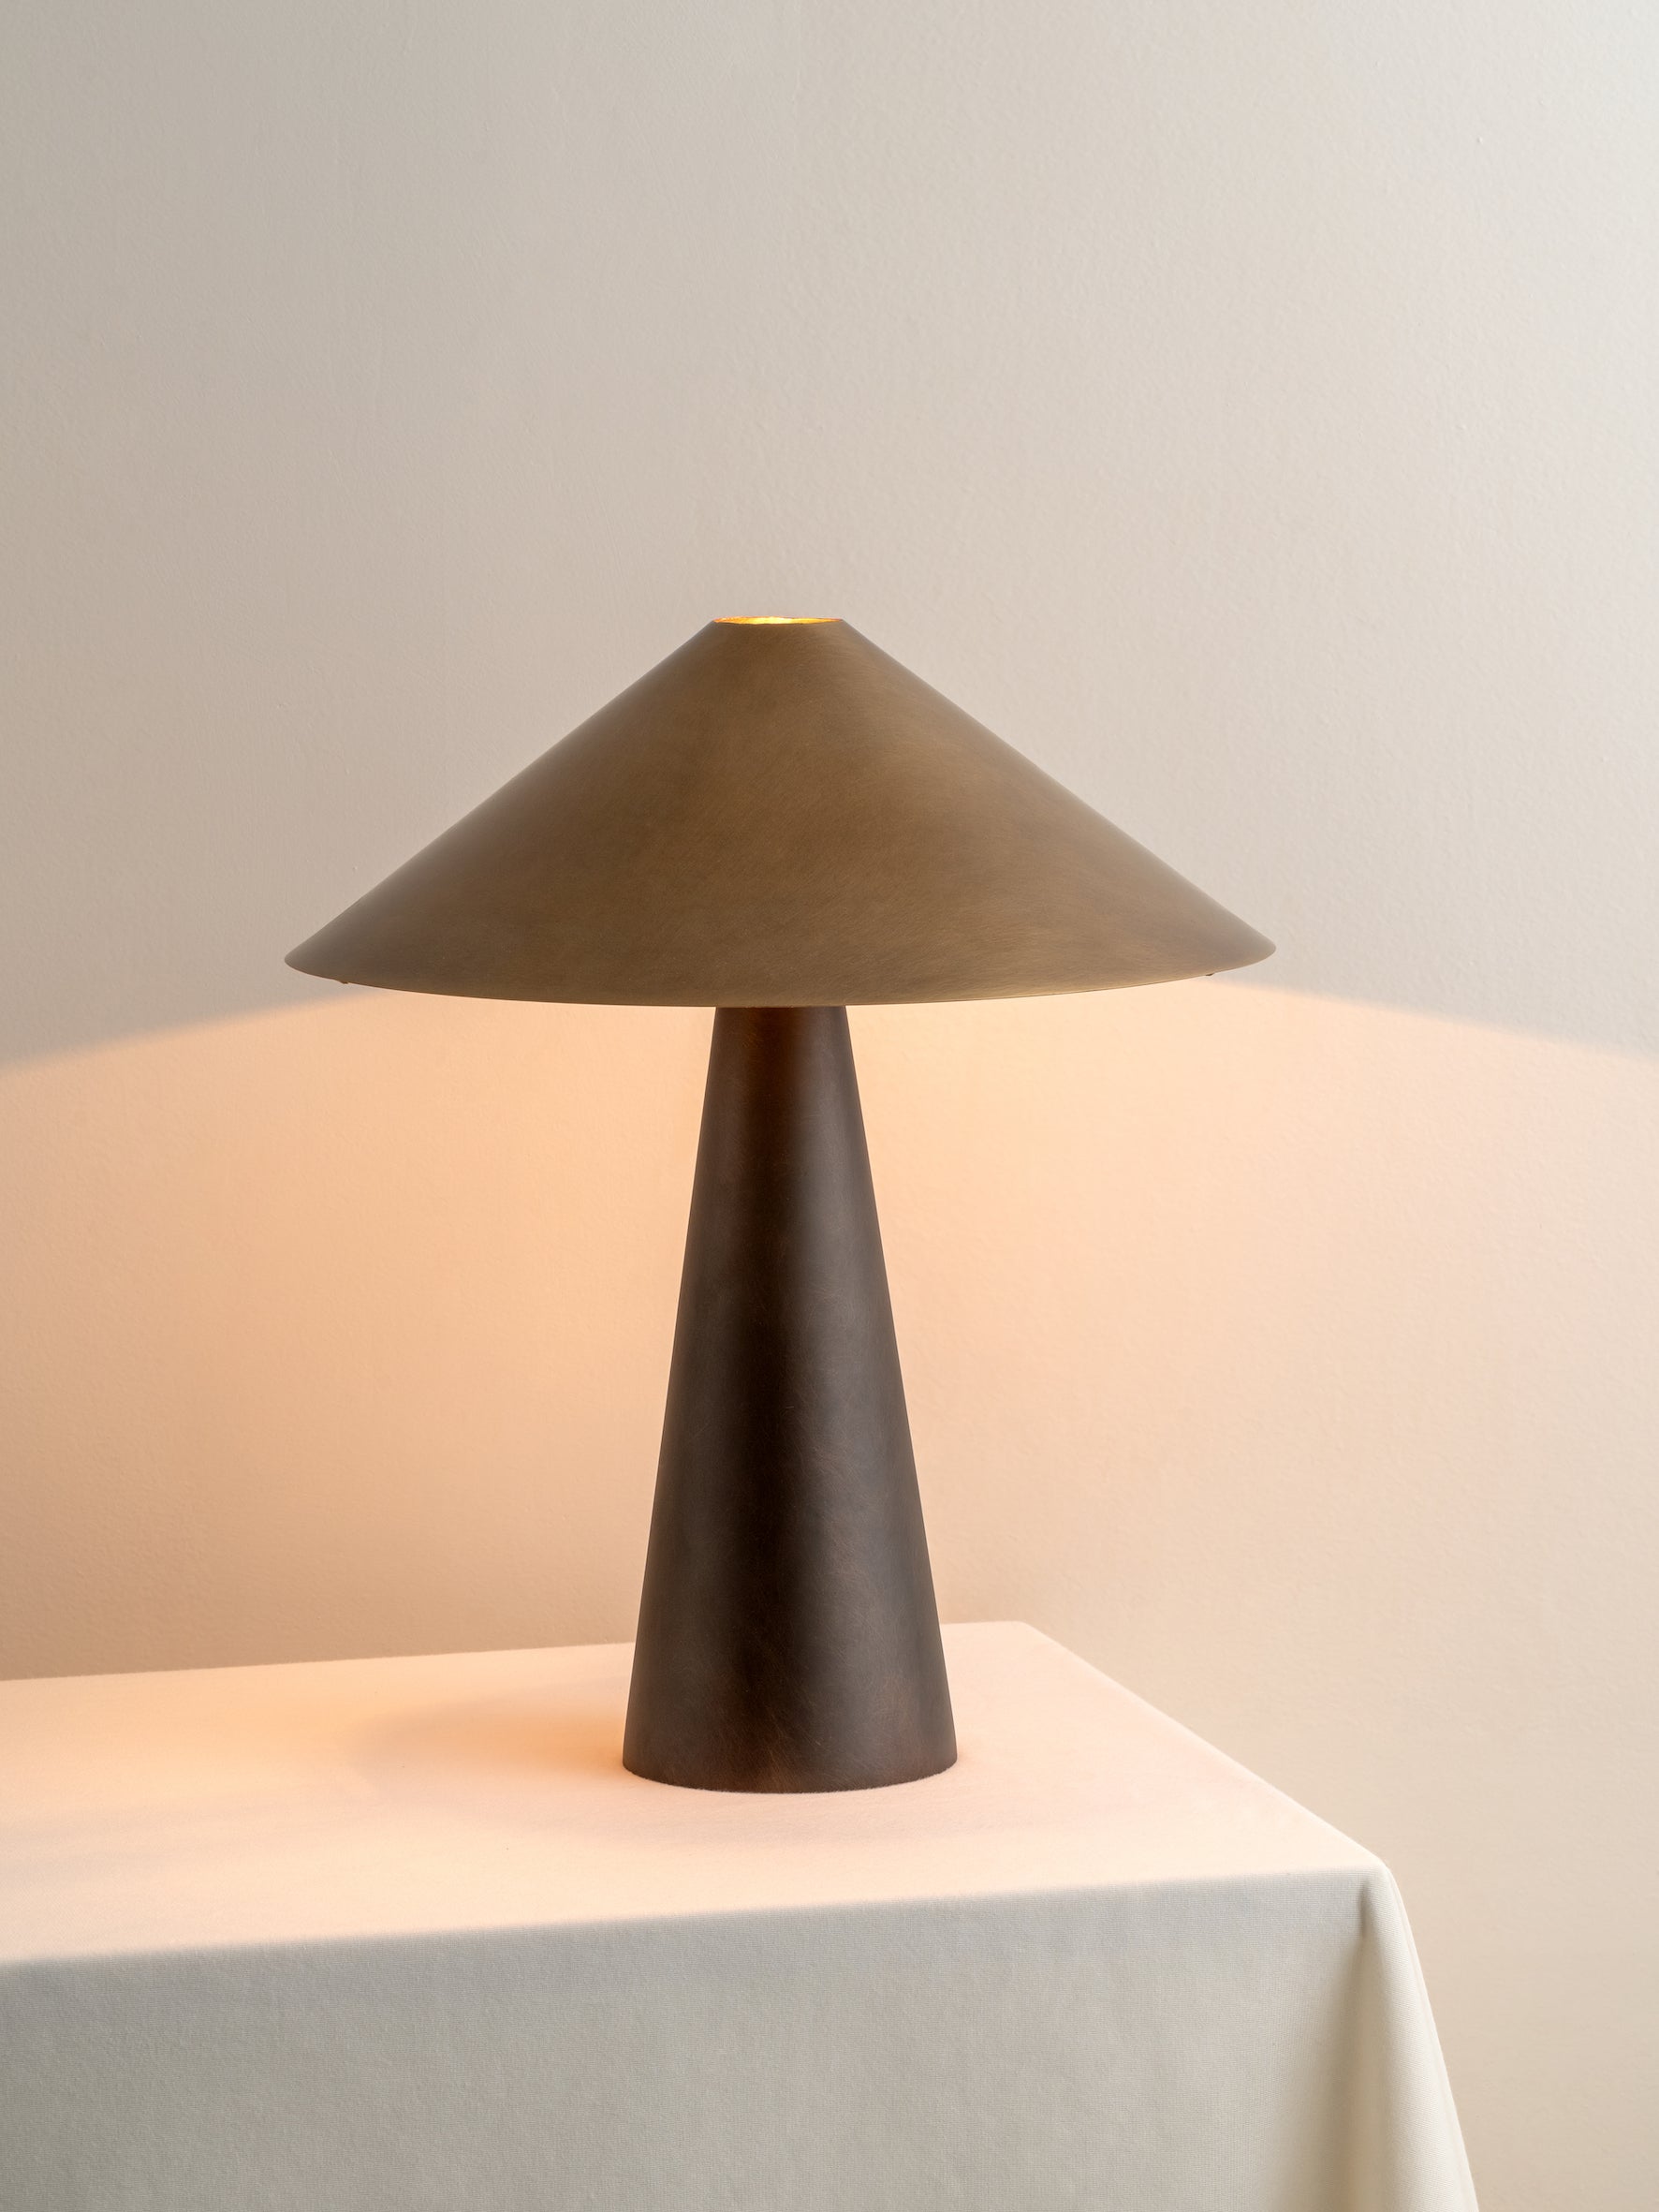 Orta - aged brass and bronze cone table lamp | Table Lamp | Lights & Lamps | UK